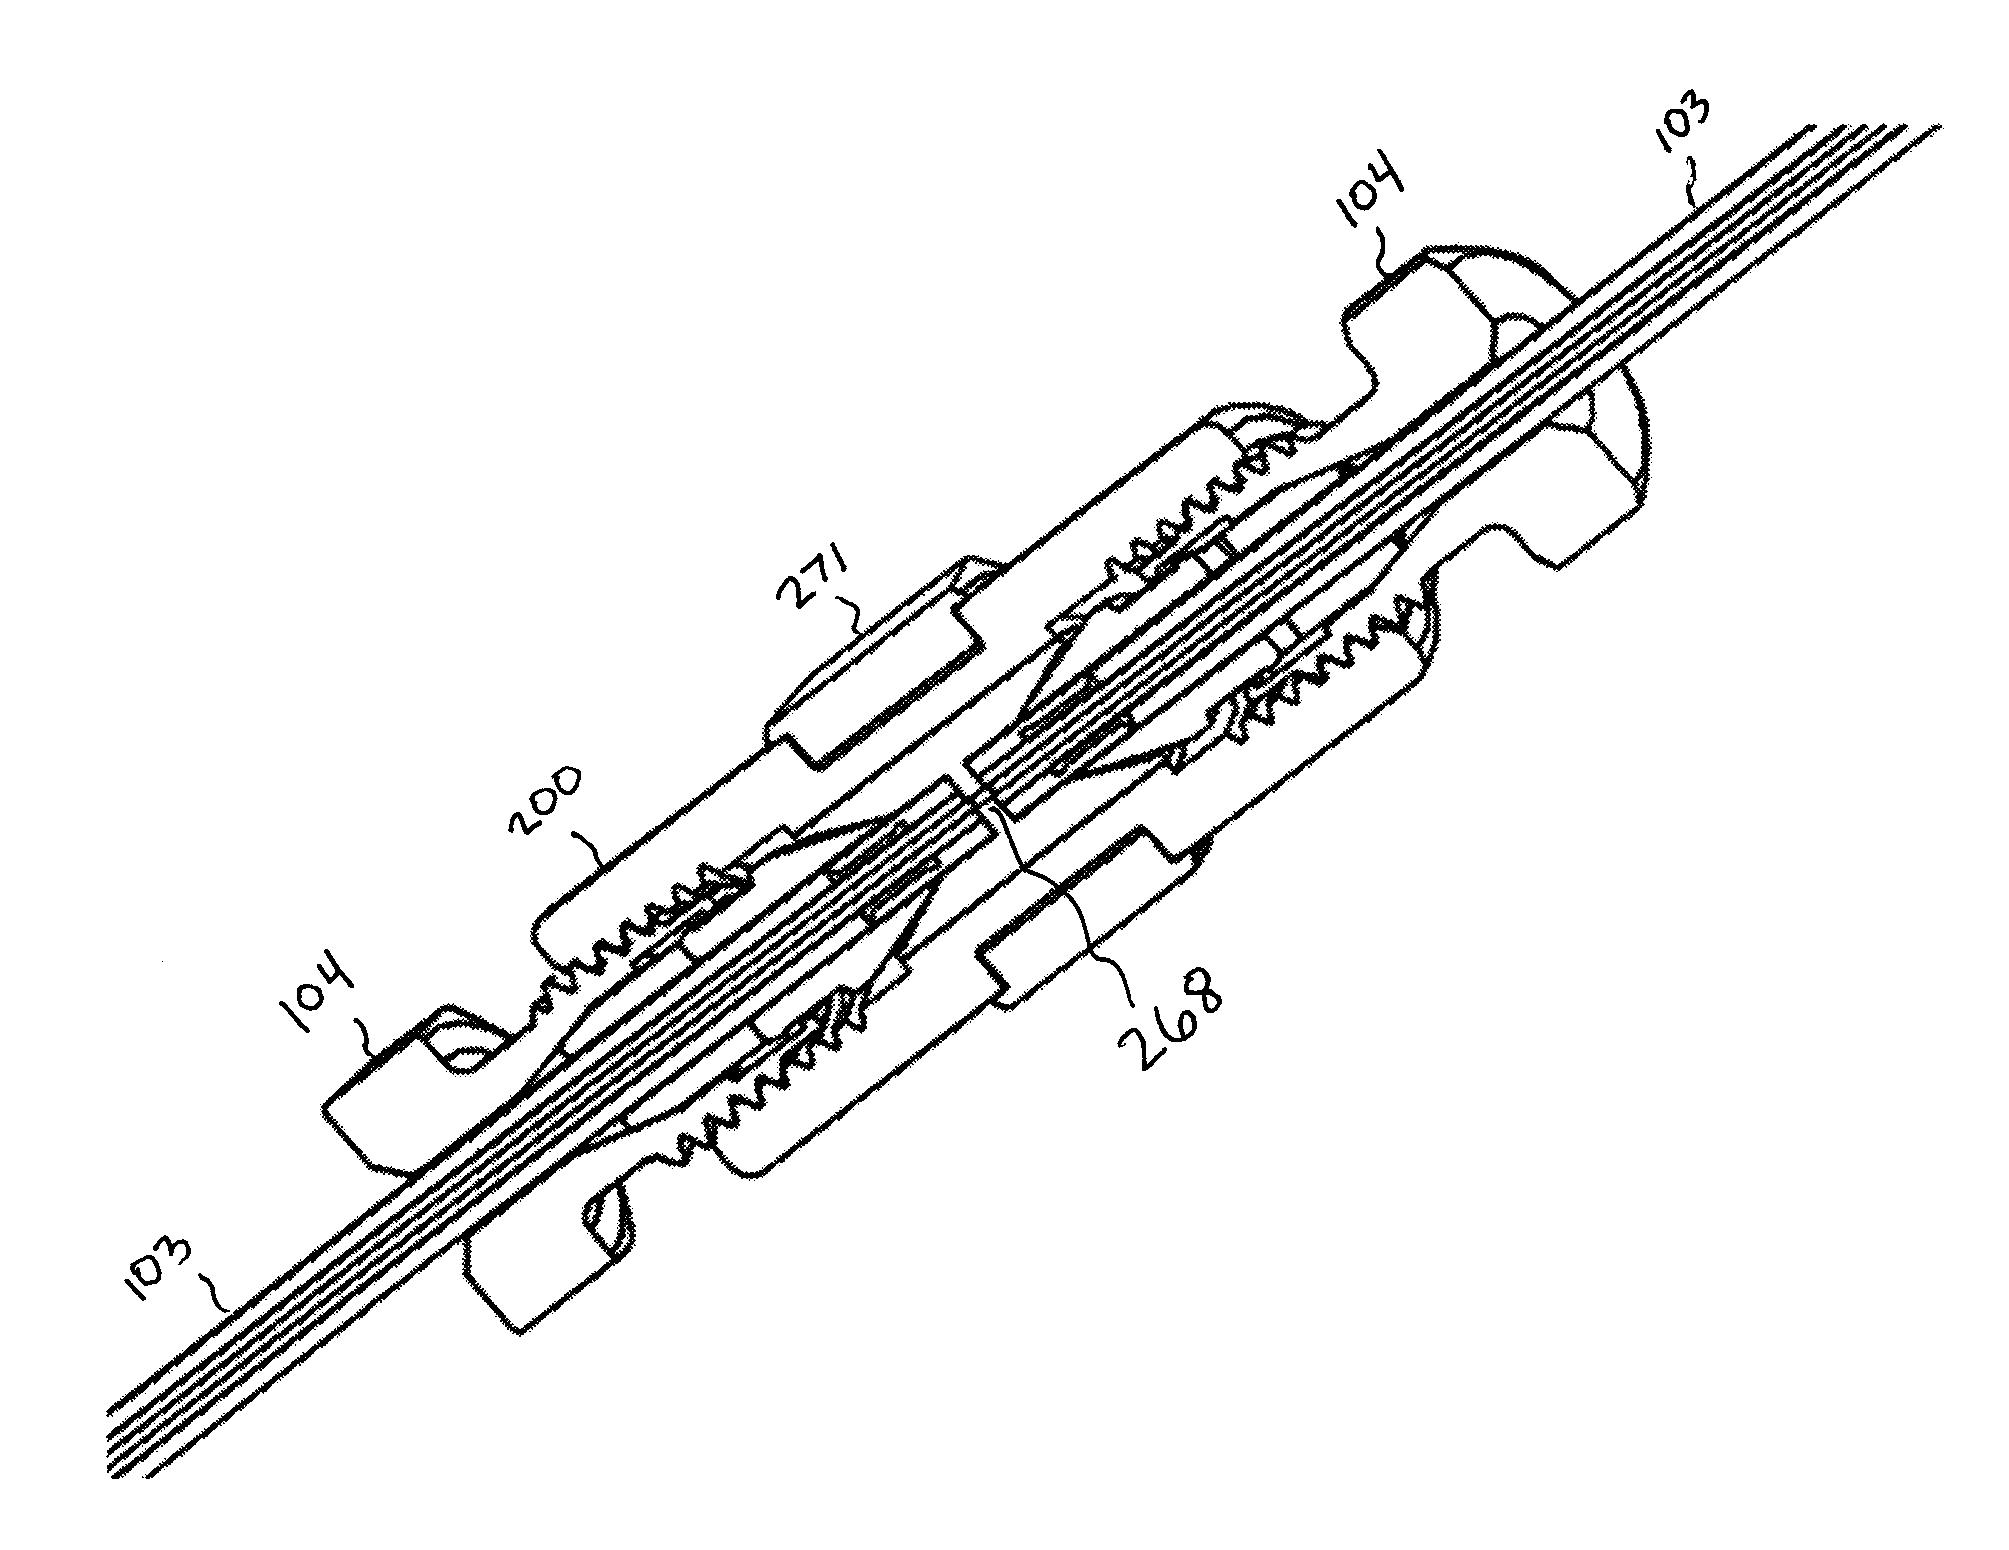 Connector with structural reinforcement and biocapatible fluid passageway